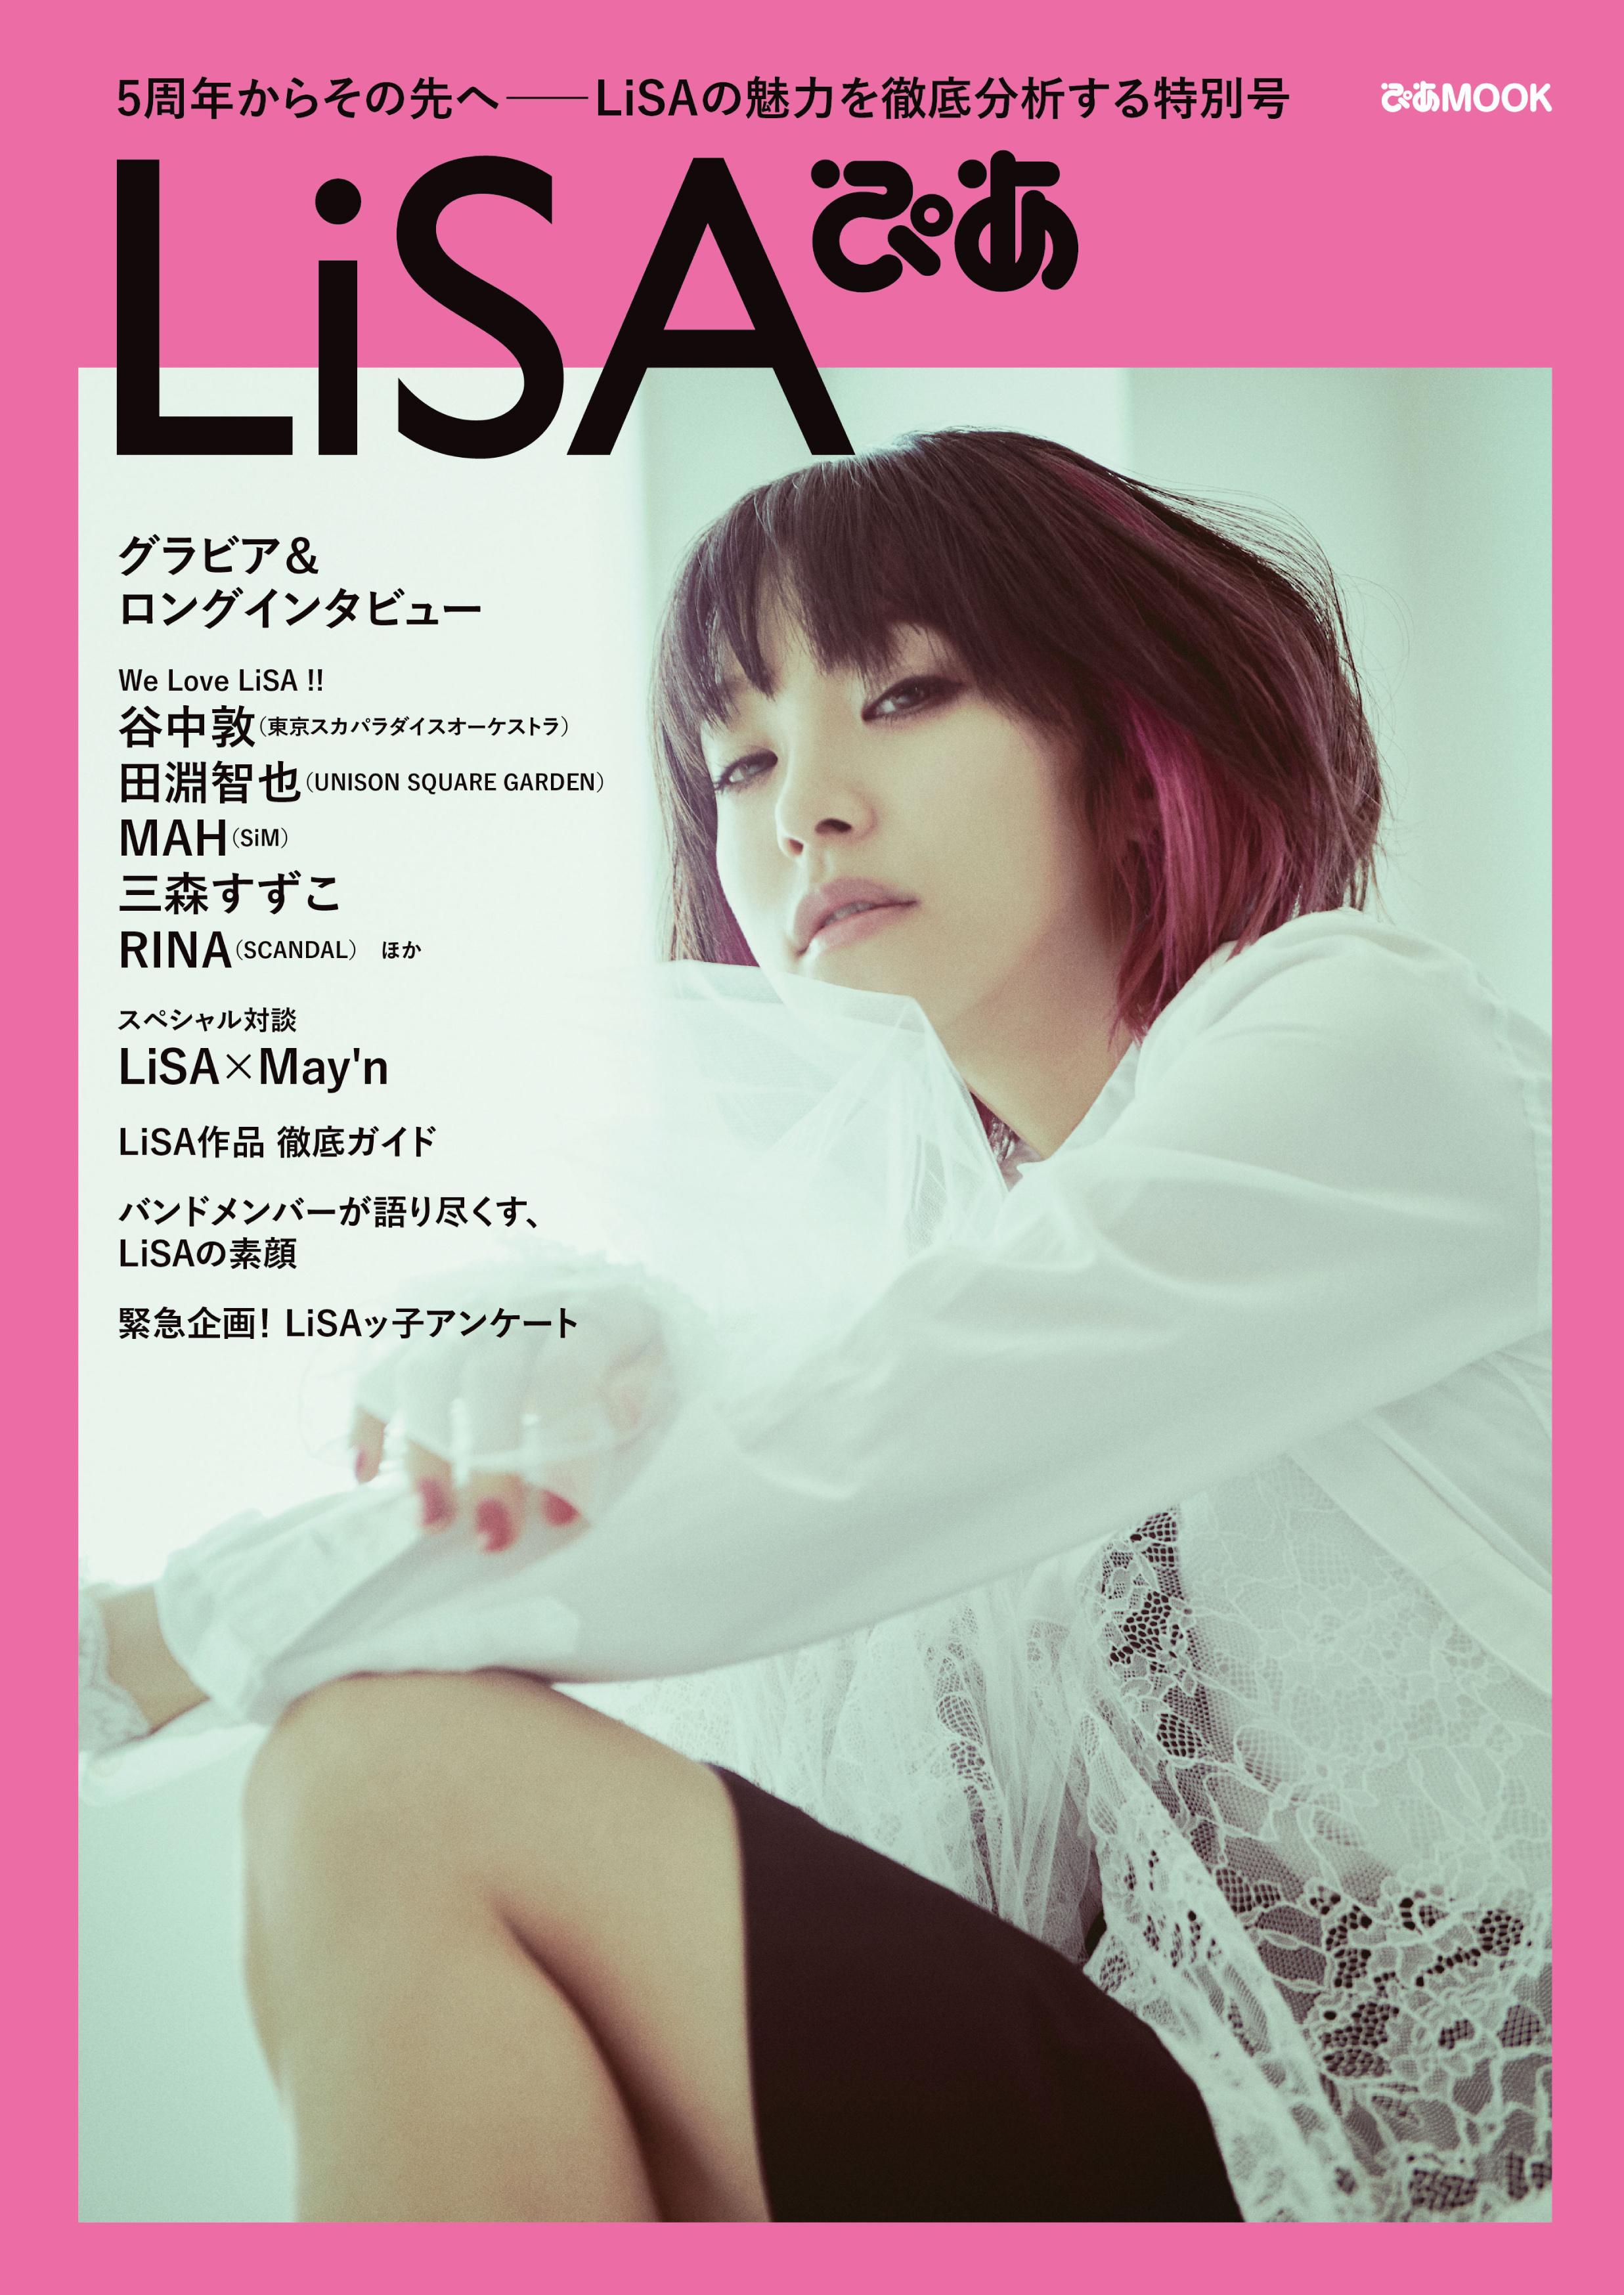 Lisa Pia A Magazine Which Summarizes Lisa S Music Activities Since Her Debut Will Be Released On The 18th Of June Sat Moshi Moshi Nippon もしもしにっぽん